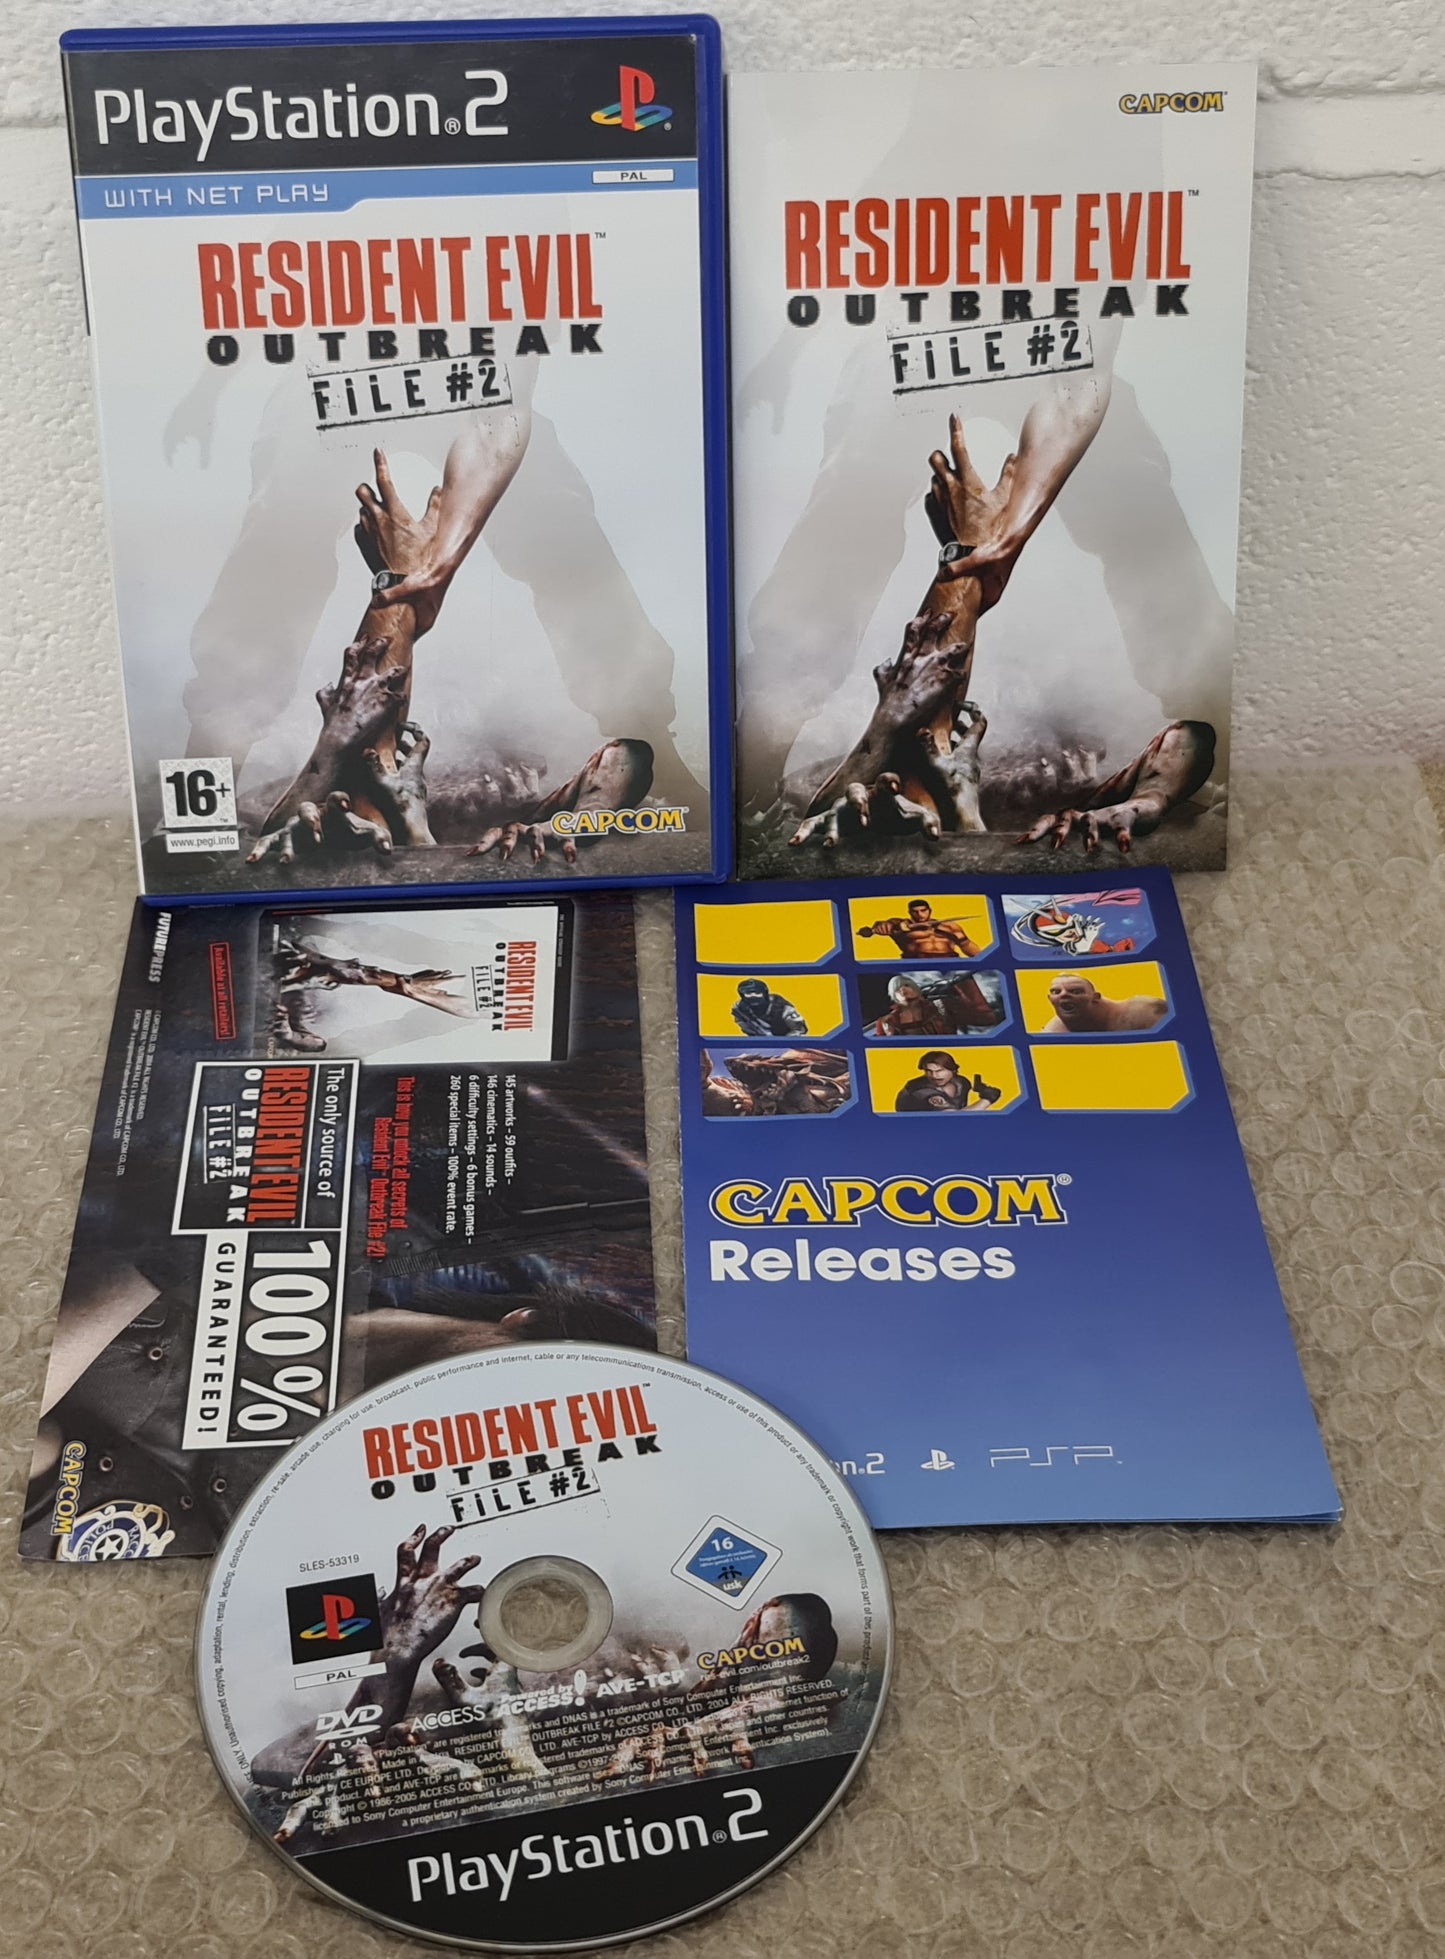 Resident Evil Outbreak File 2 Sony Playstation 2 (PS2) Game